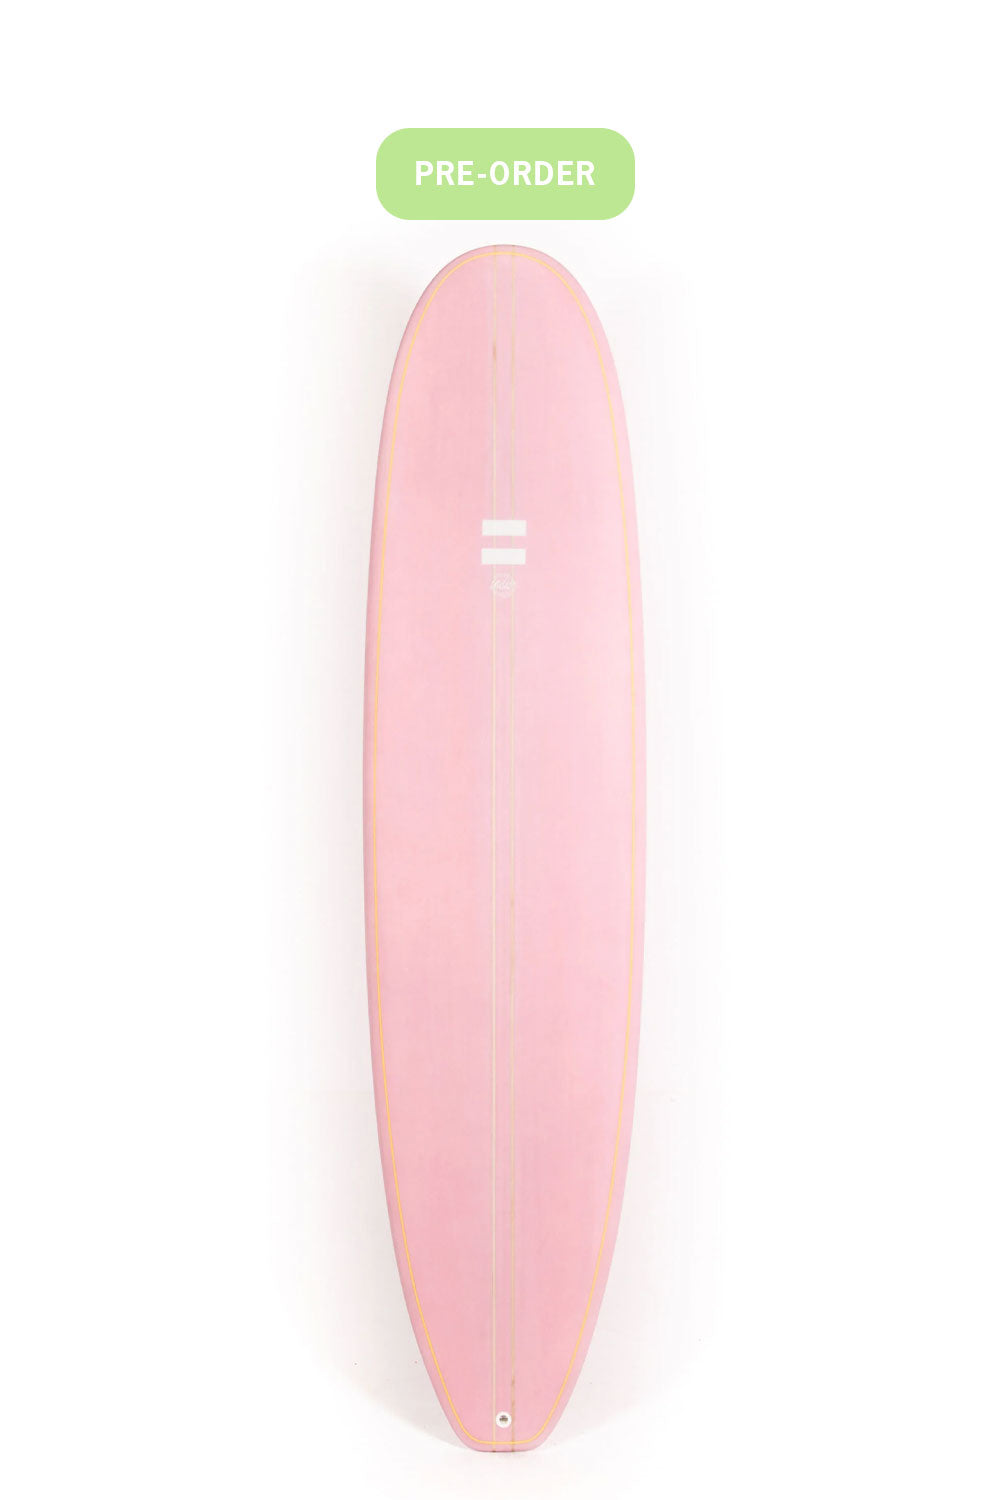 Pukas-Surf-Shop-Indio-Surfboards-Mid-Length-pink-7_6